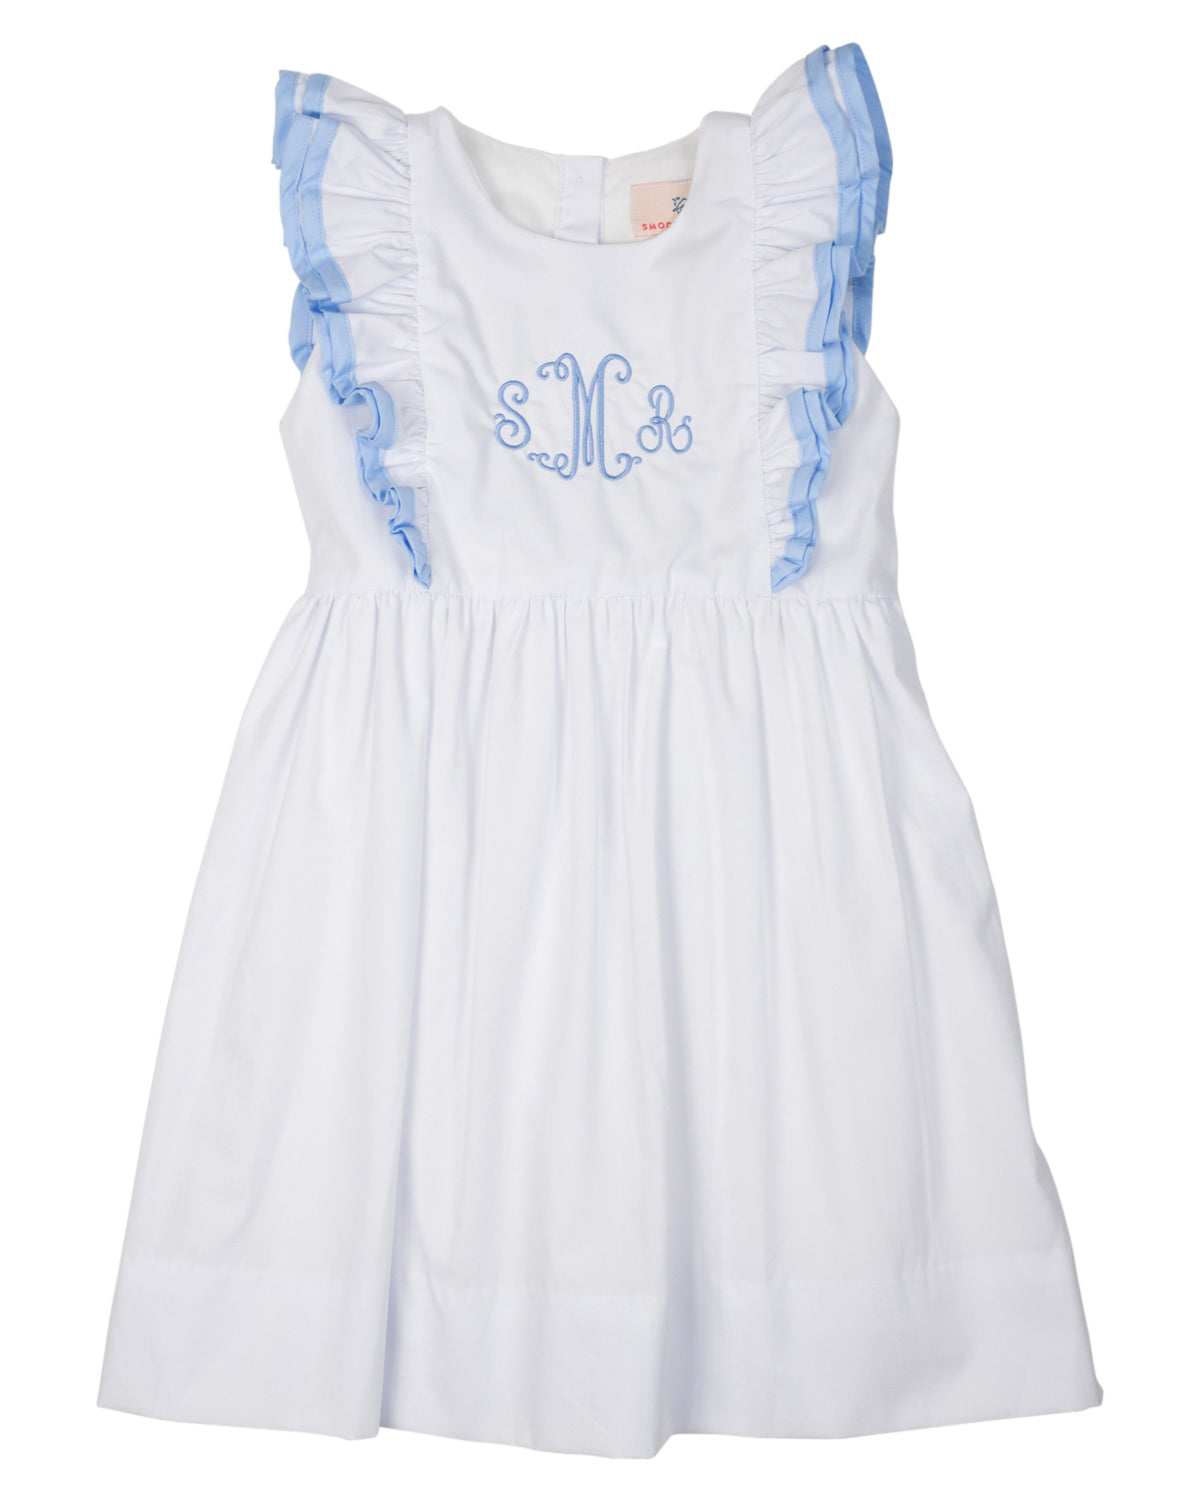 White Bell Dress with Blue Trim